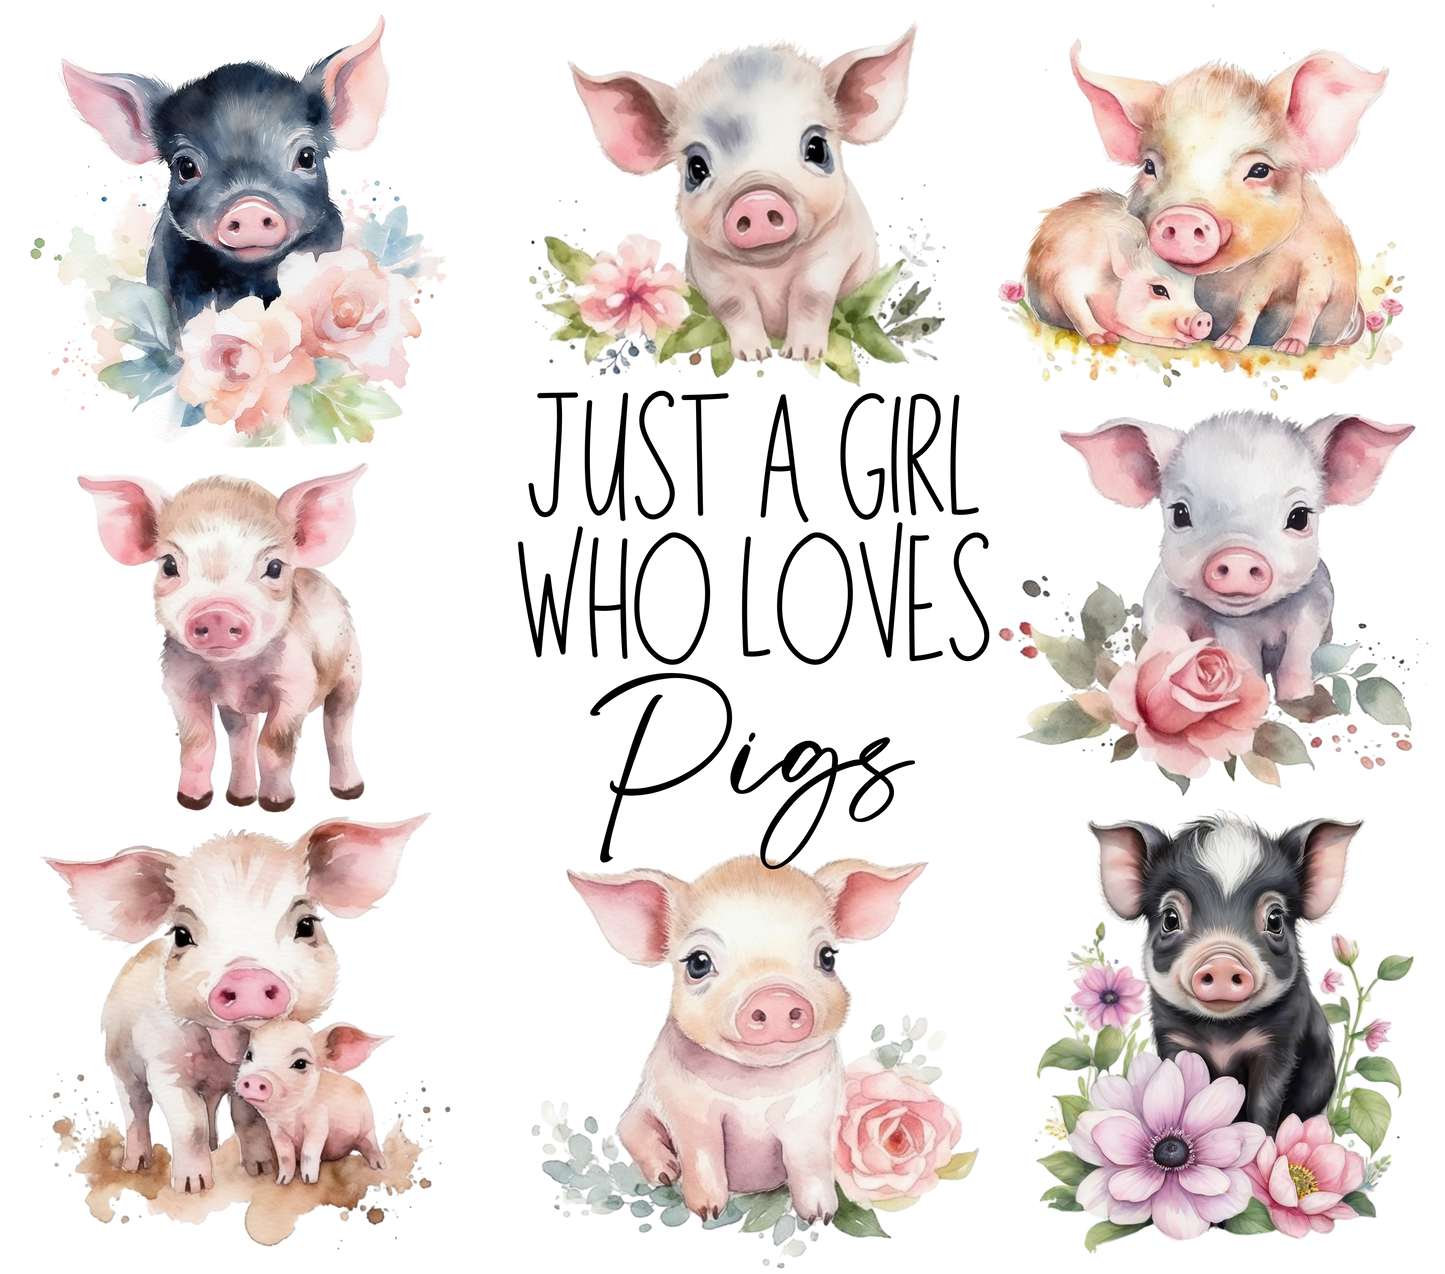 Pigs and girls